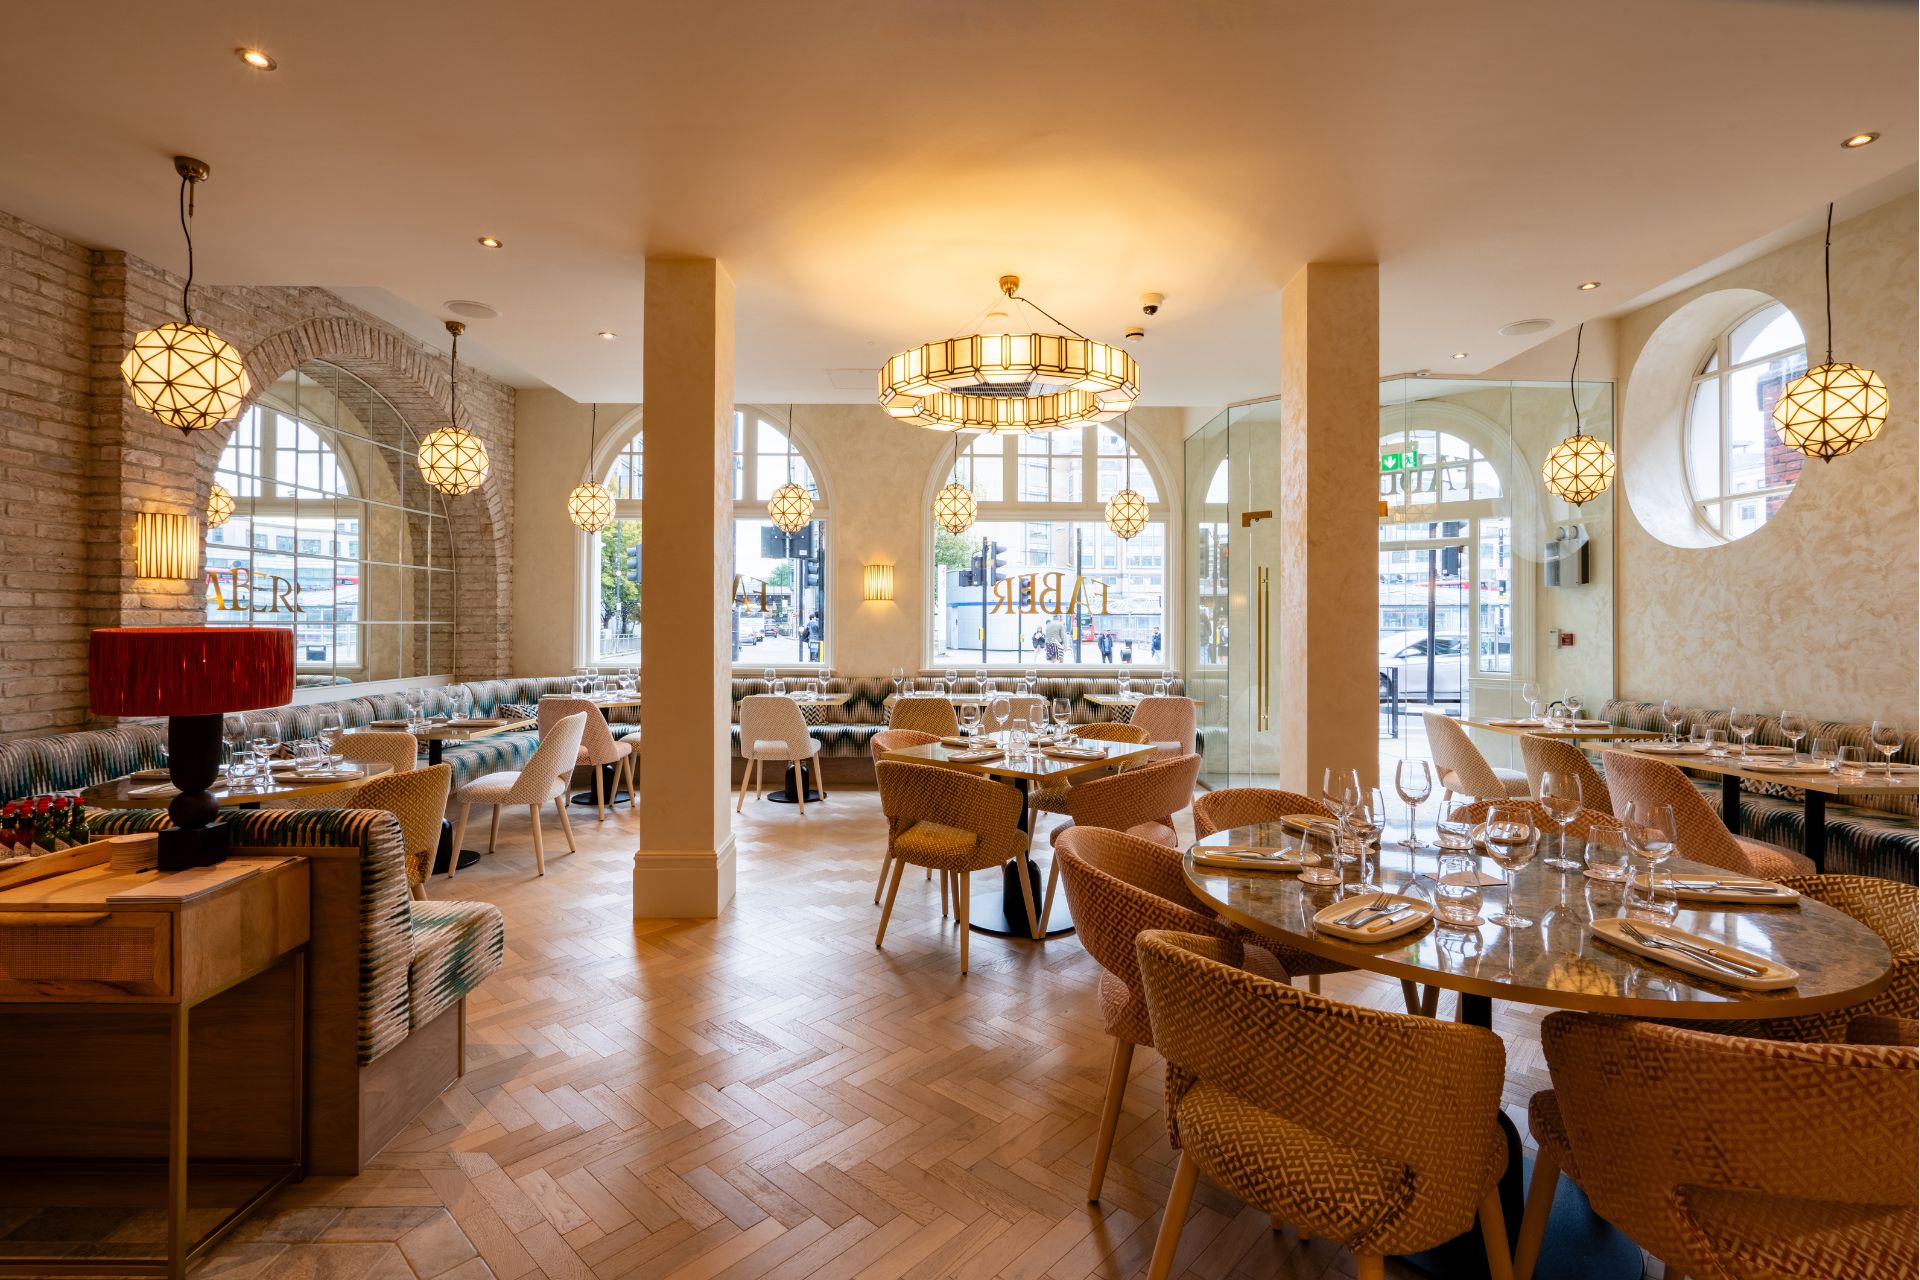 Restaurant interior with parquet floors, art deco lampshades and white and gold chairs.